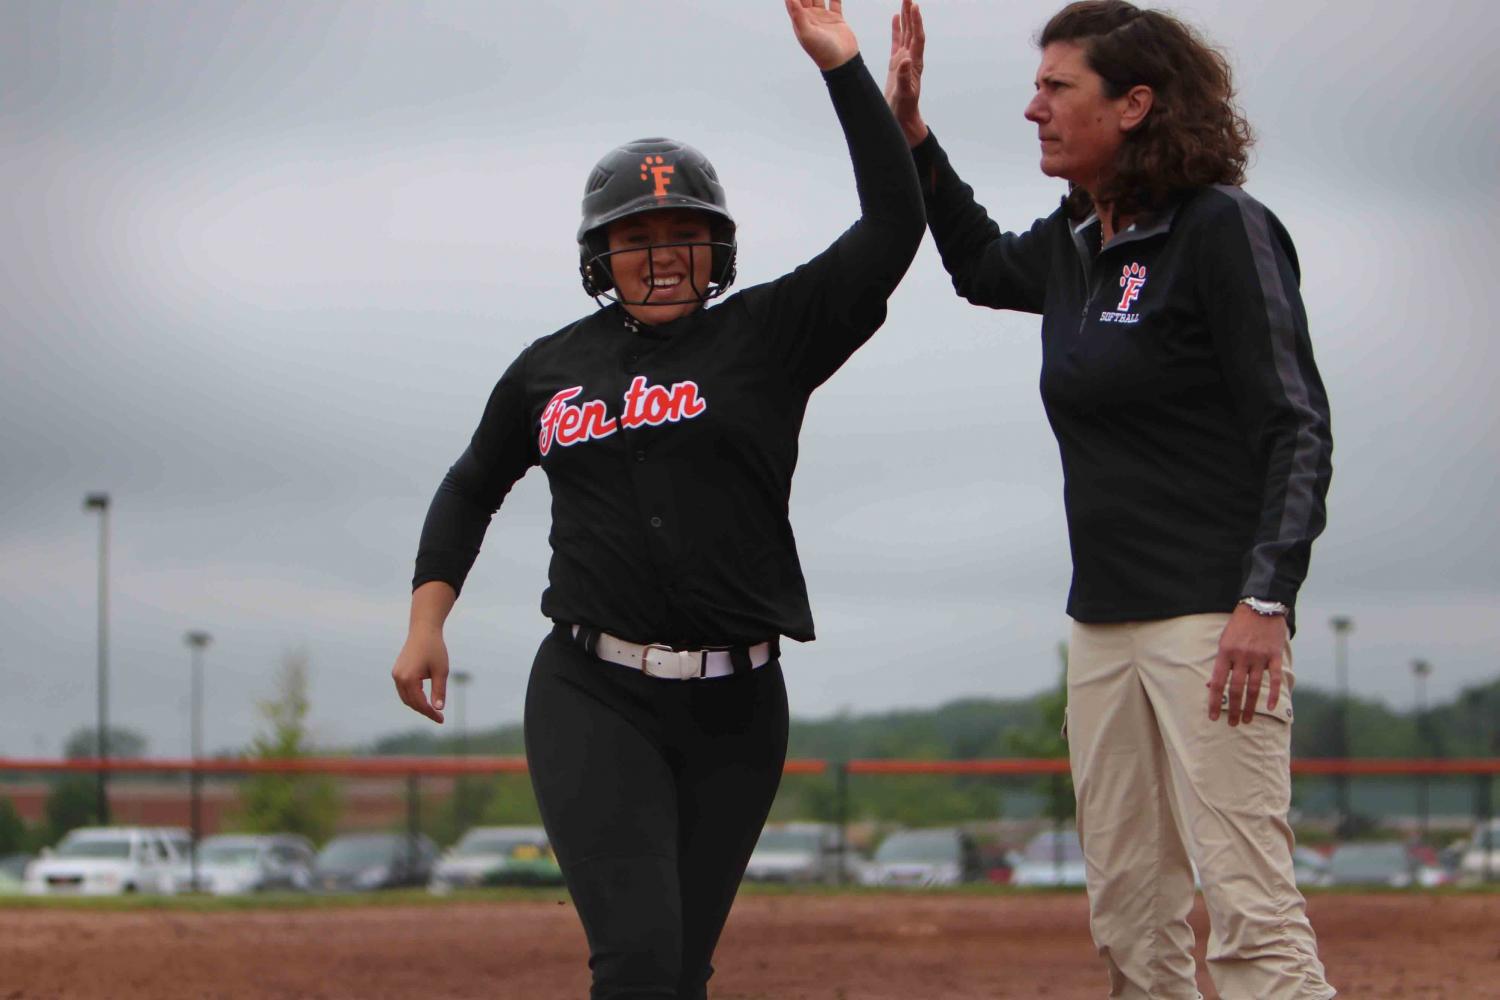 Highfiving Coach Roberts as she makes a run, senior Michaela Willett plays in her last home game as a high school athlete. At their game against Brandon the seniors were recognized for their season before graduating. 